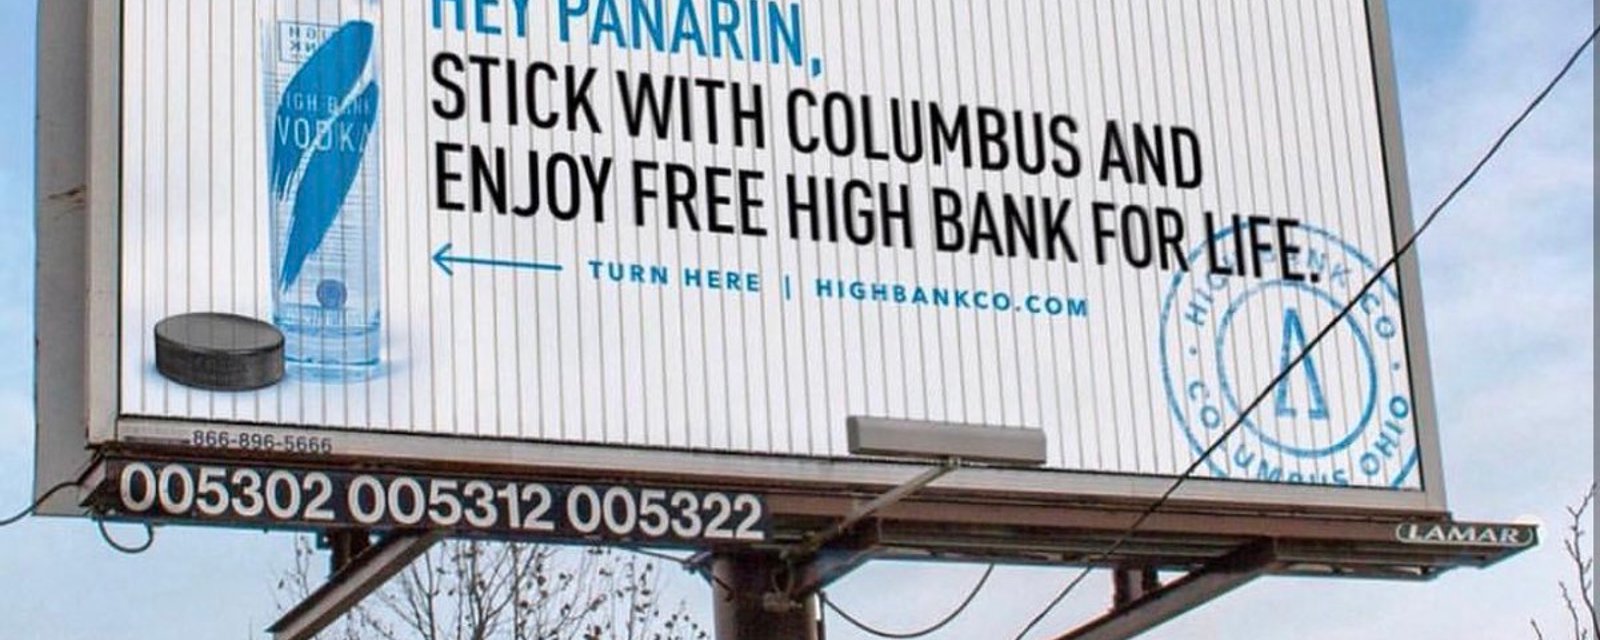 Columbus company offers Panarin free vodka for life to keep him a Blue Jacket